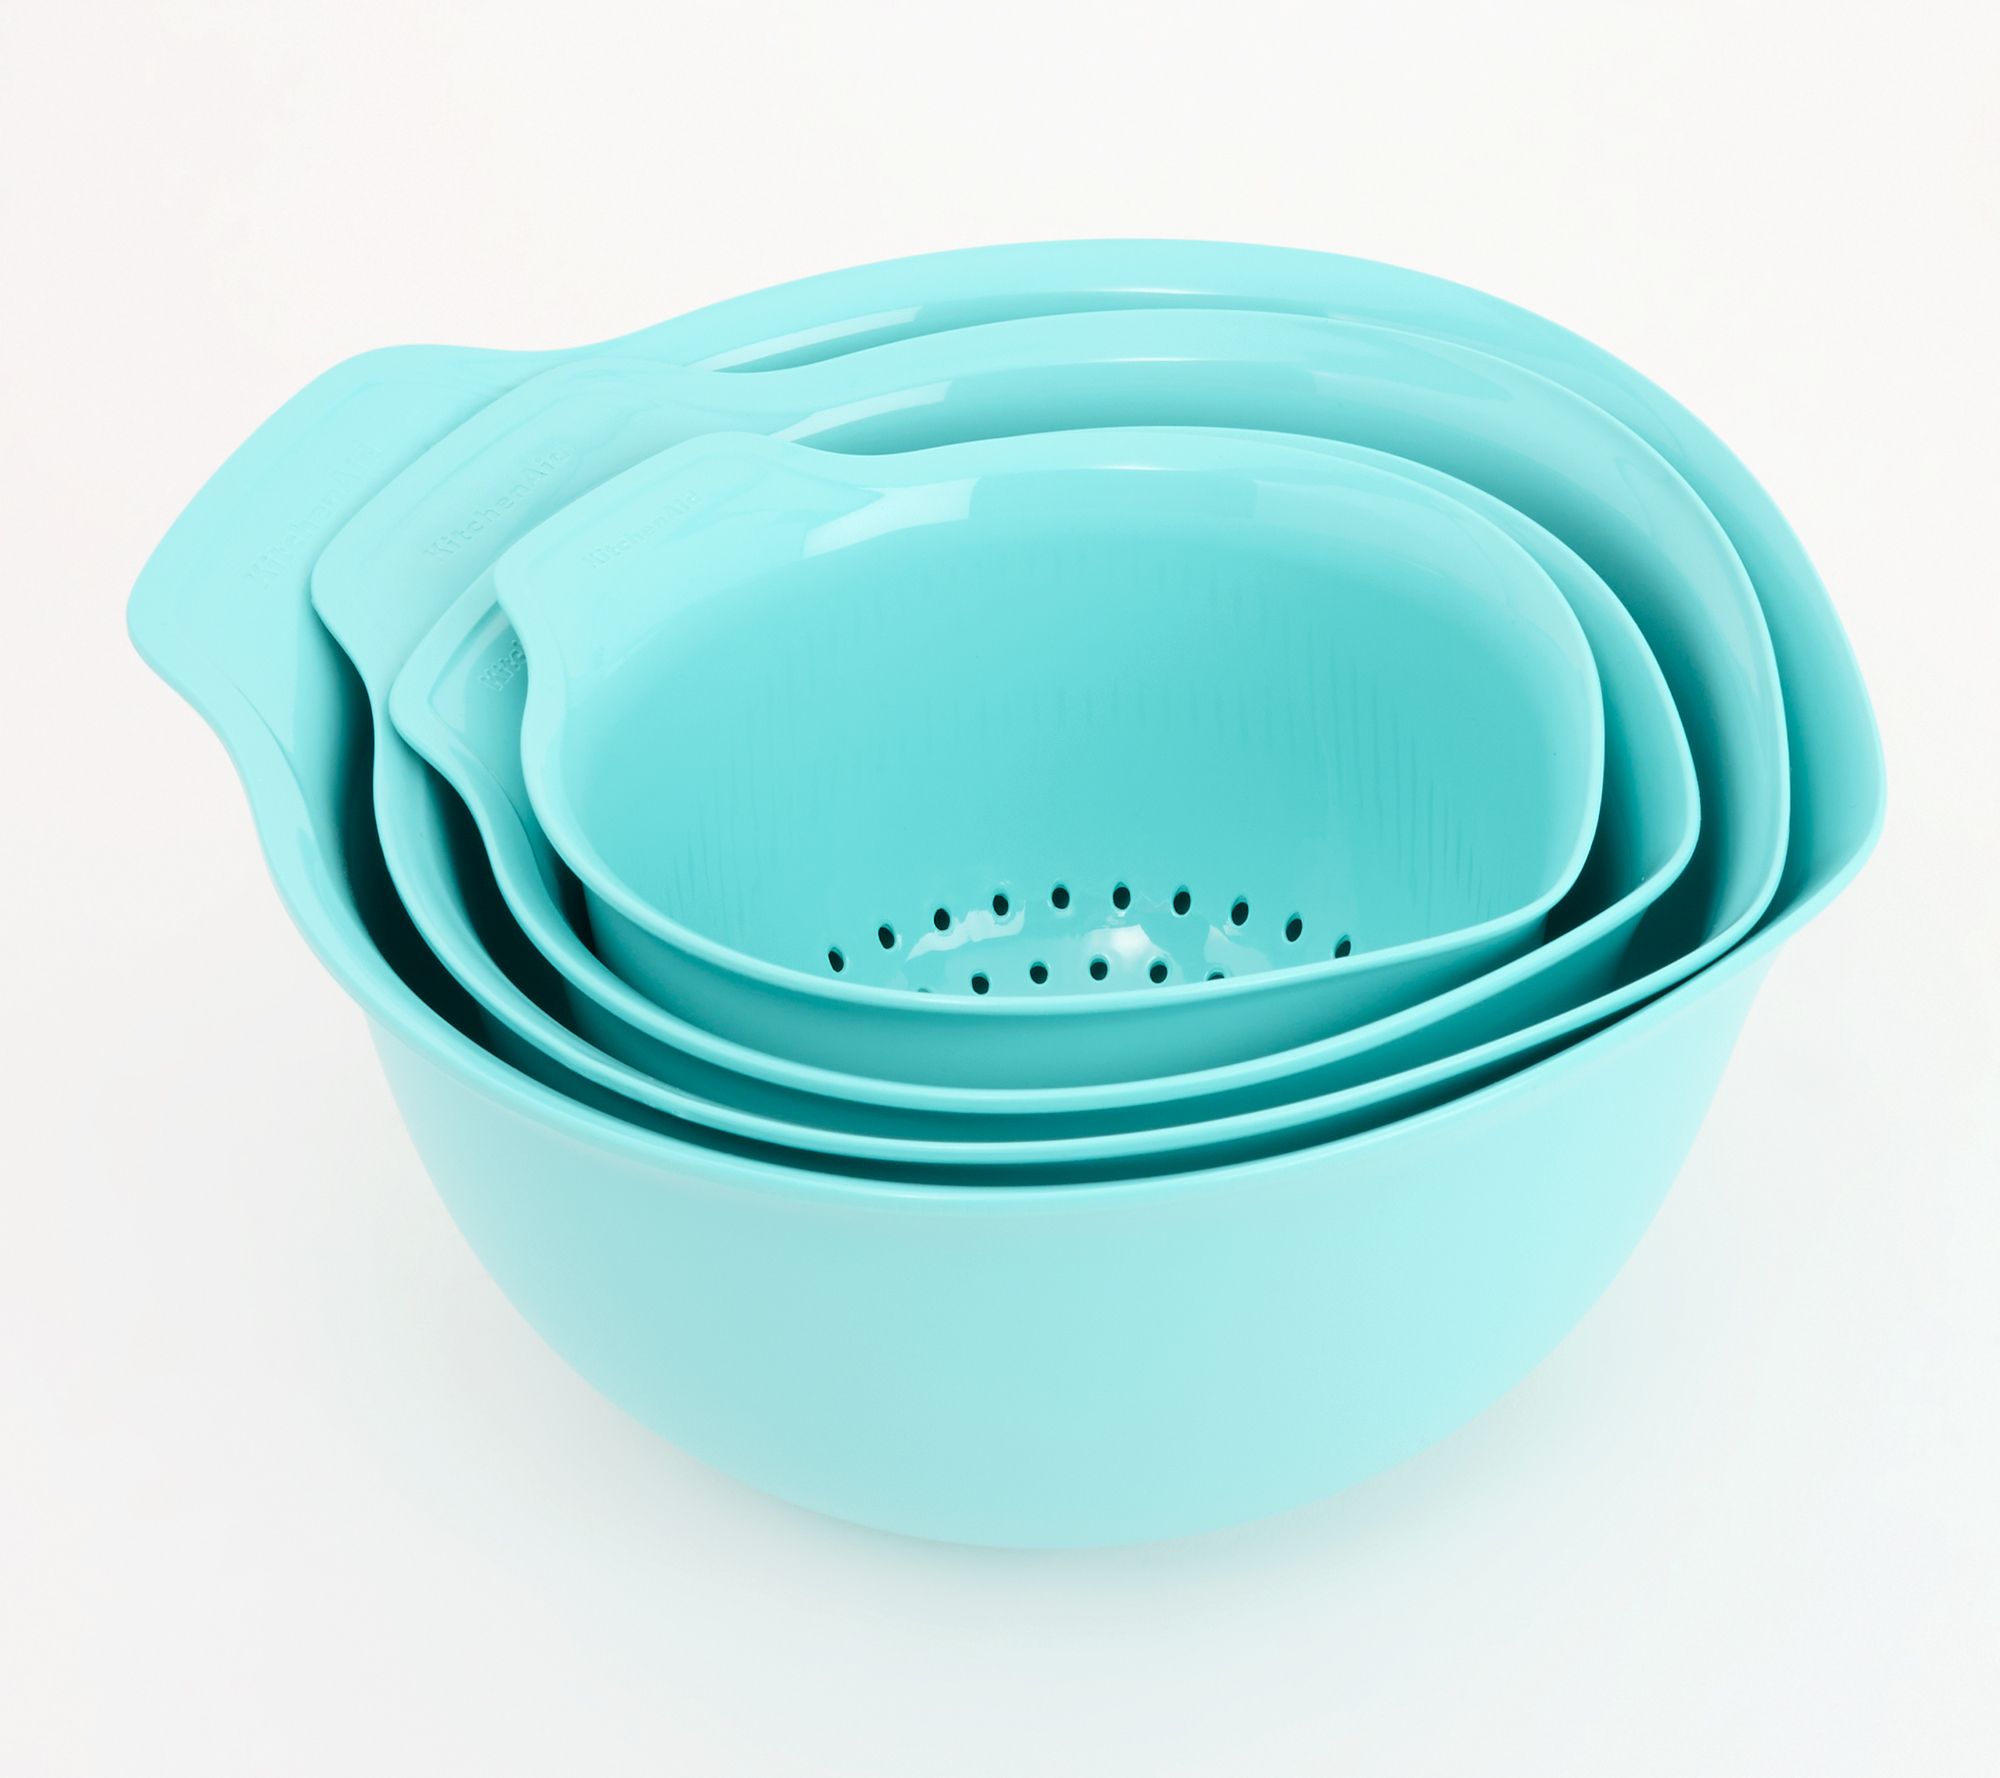 Basic Essentials 6-pc. Mixing Bowl and Colander Set